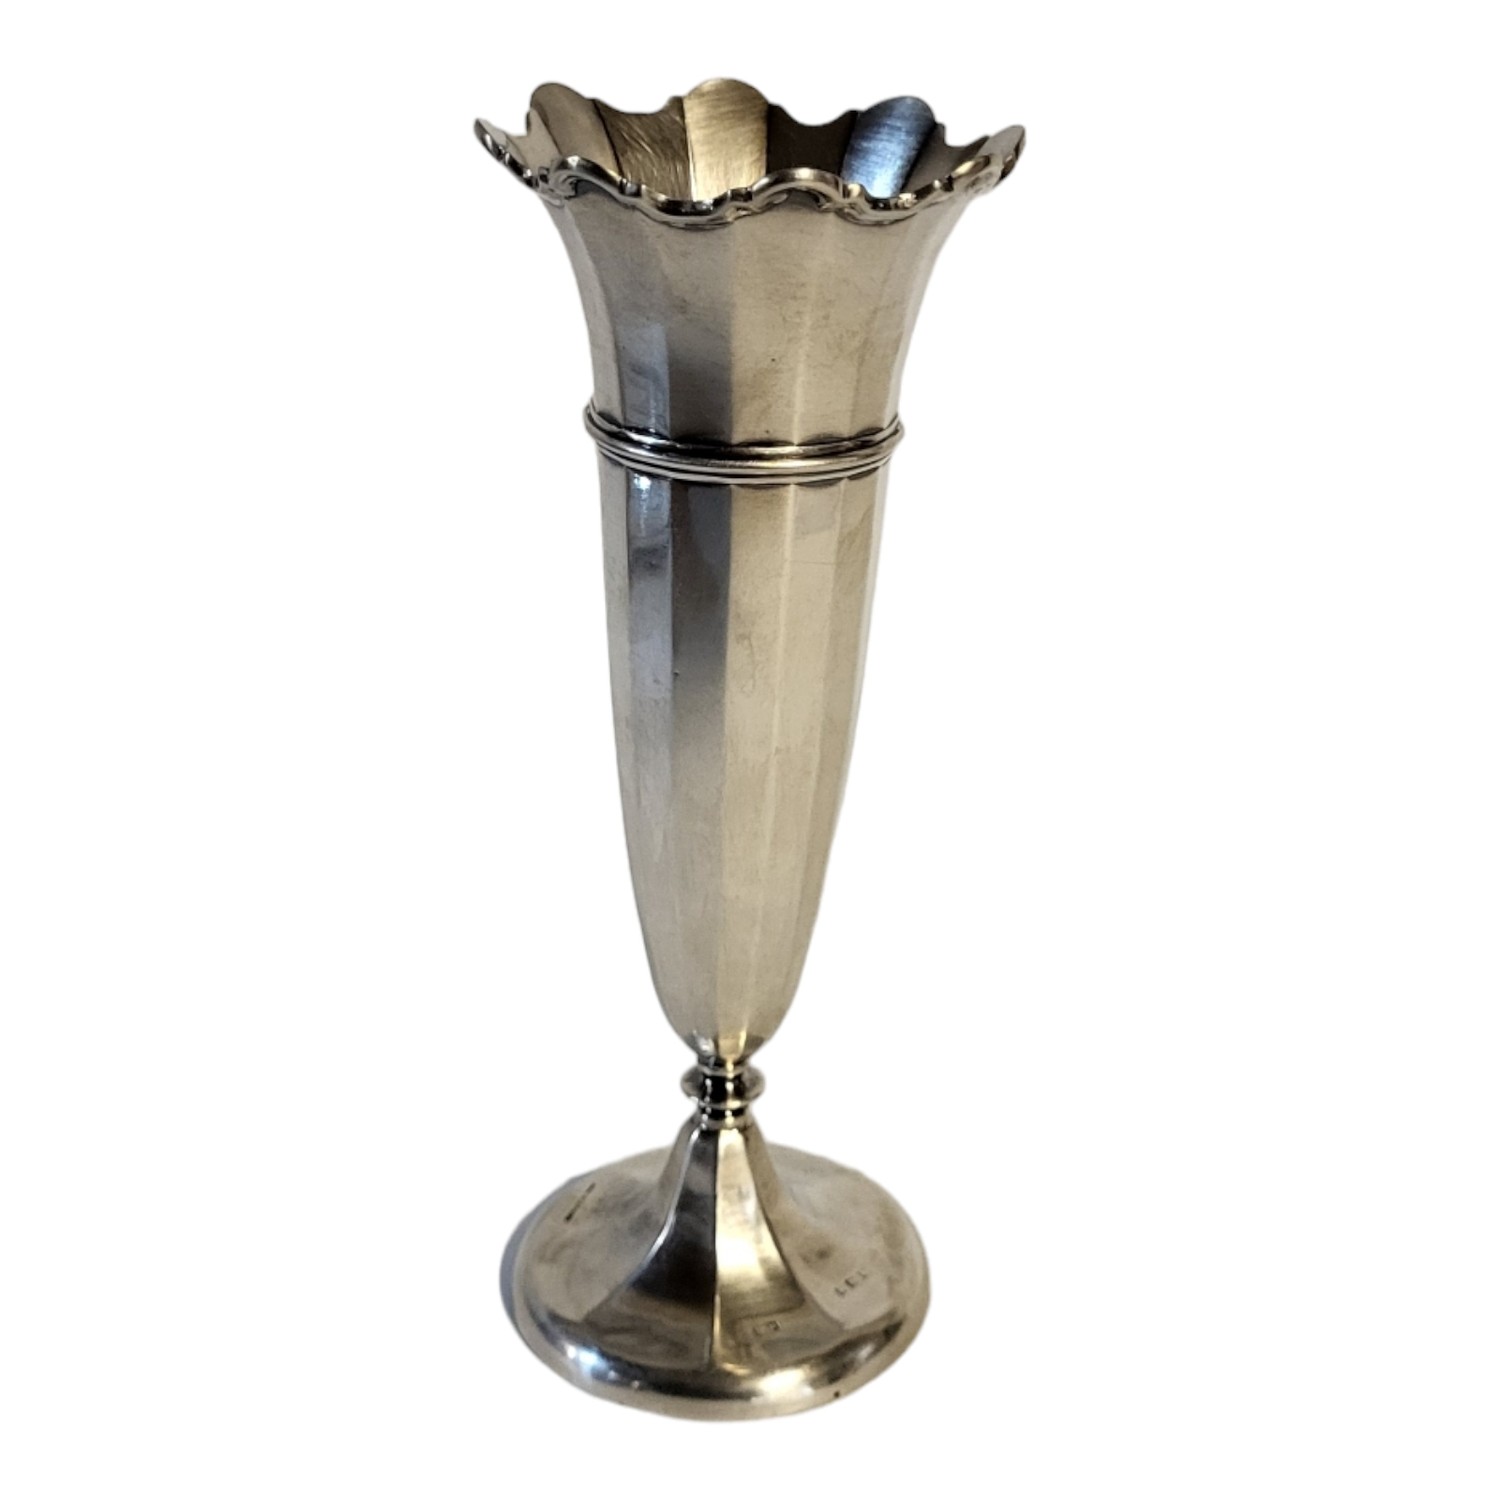 AN EARLY 20TH CENTURY SILVER TRUMPET VASE Having a scrolled flared rim with reeded design on - Image 3 of 3